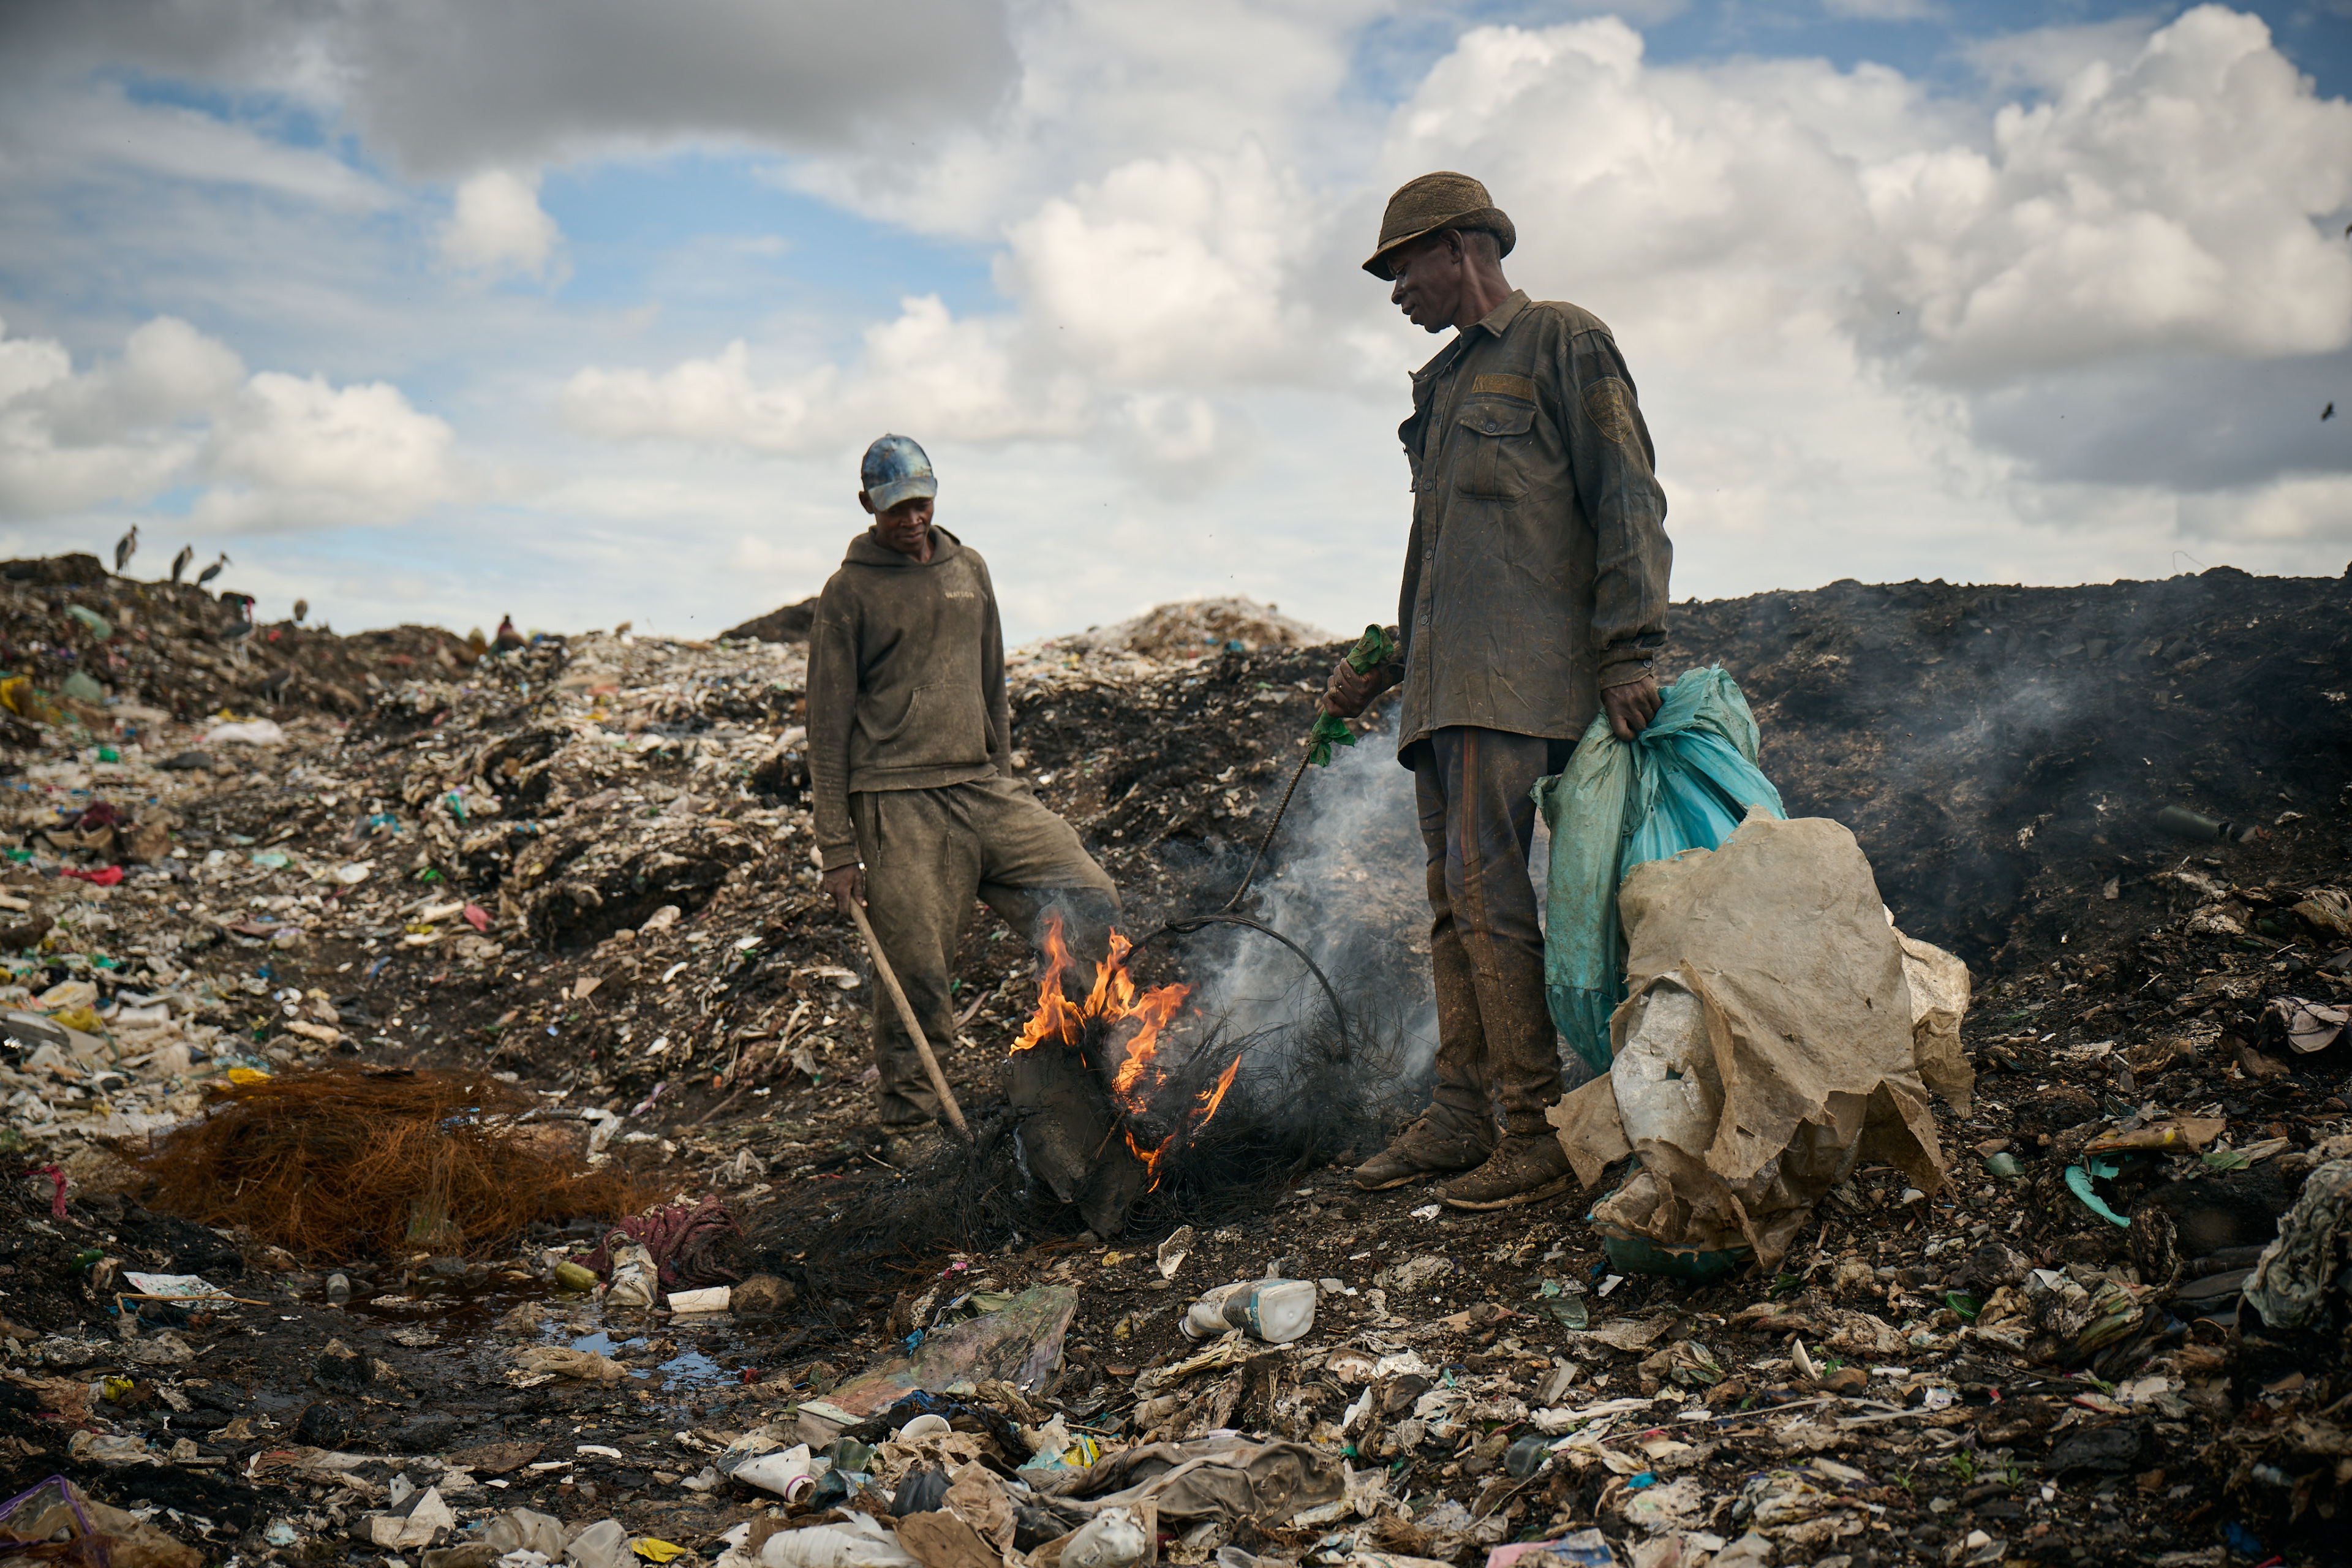 Workers at the Dandora dumpsite in Nairobi, Kenya, where open burning of waste has a significant impact on human health